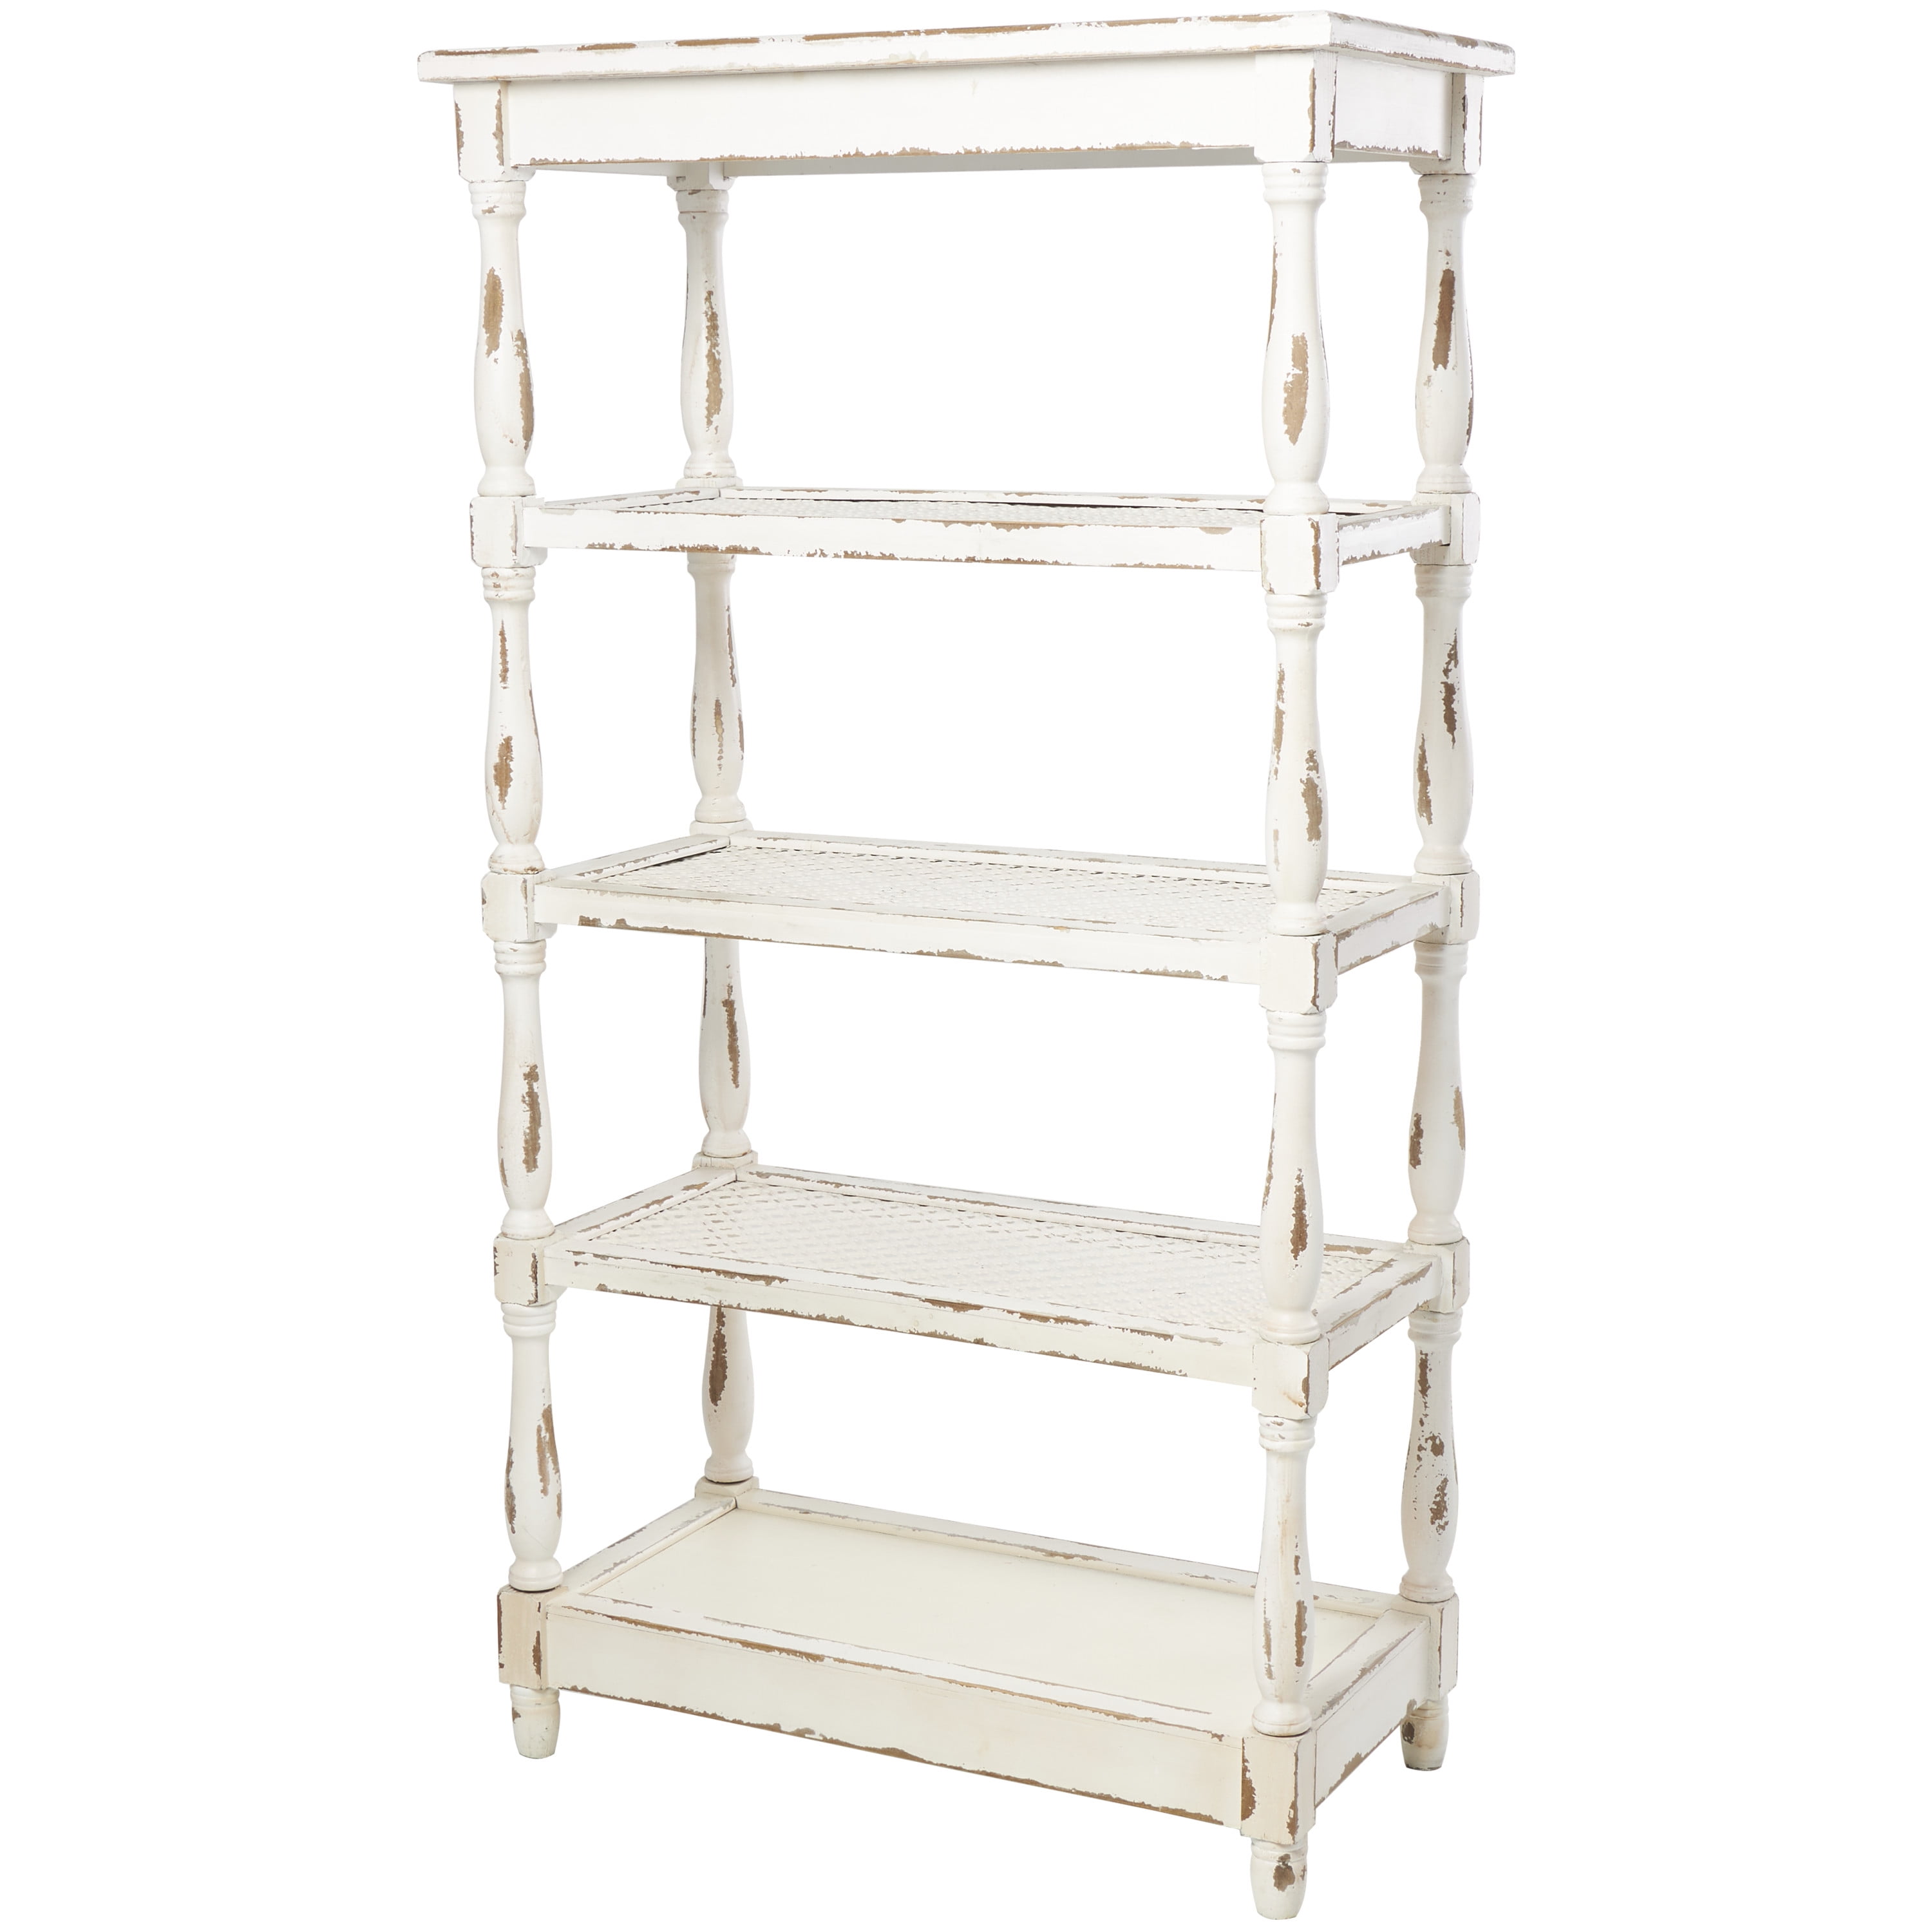 METAL BOOK STAND IN DISTRESSED WHITE FINISH 